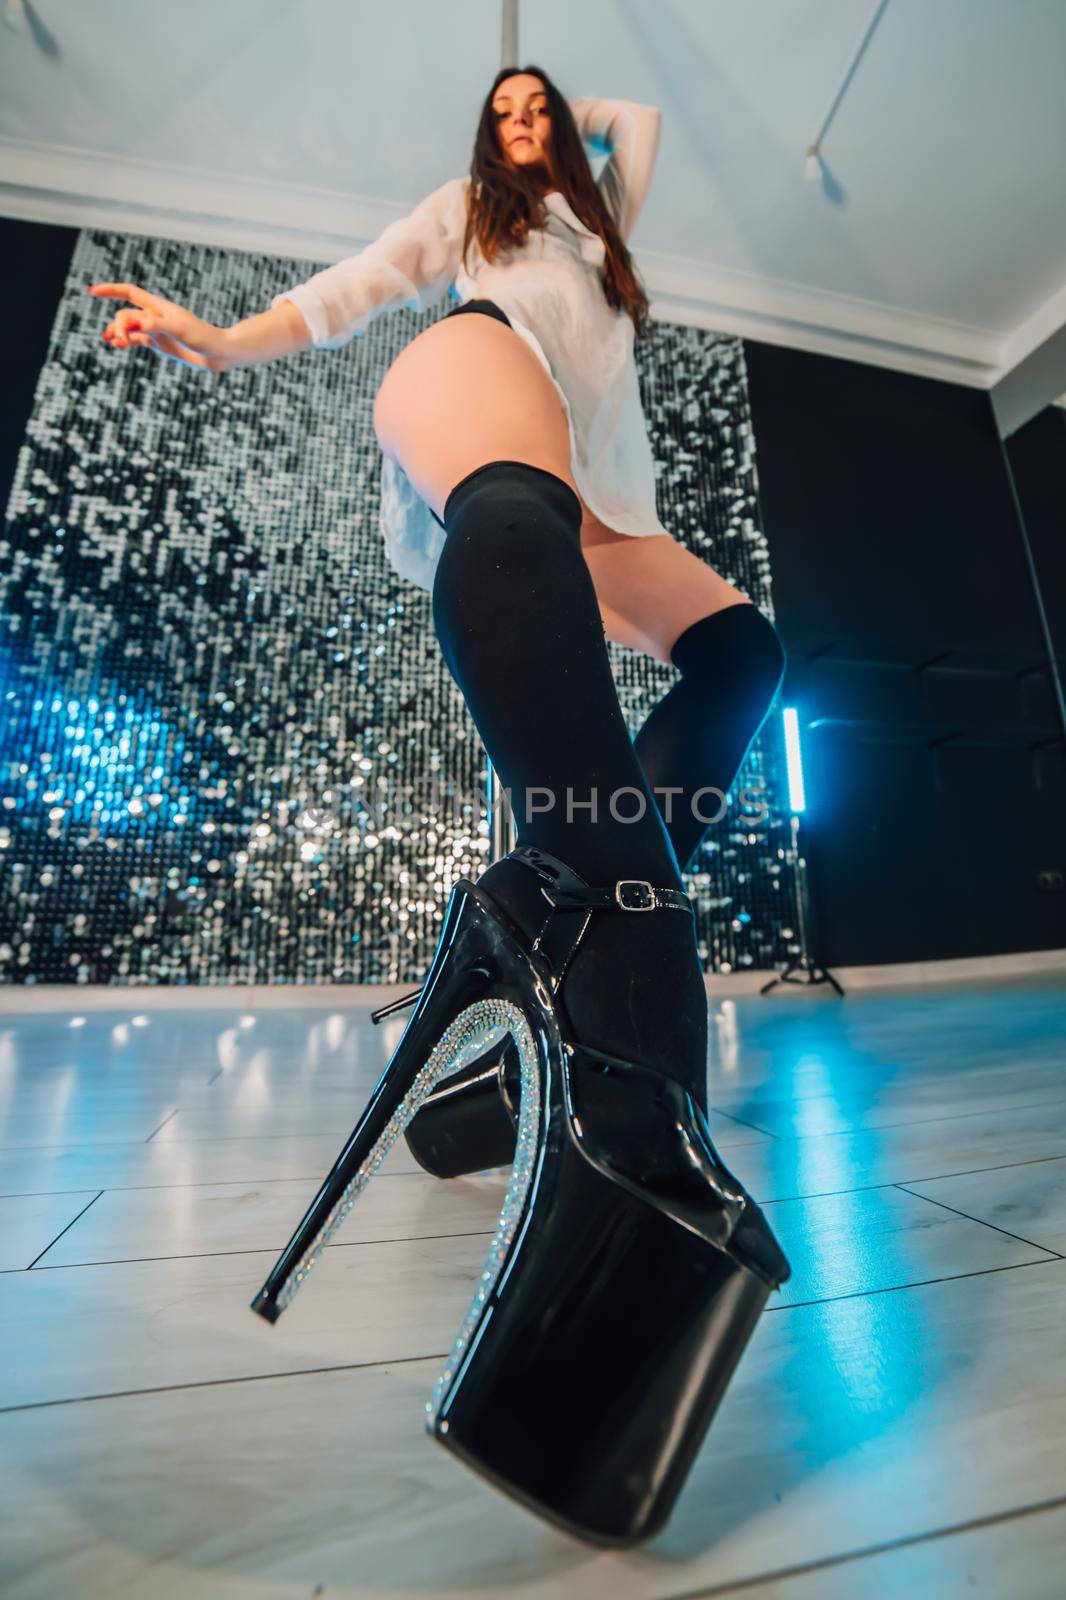 Alluring woman with long hair posing with pylon on shining wall background. Pole-dance, sexy, temptation concept. High quality photo